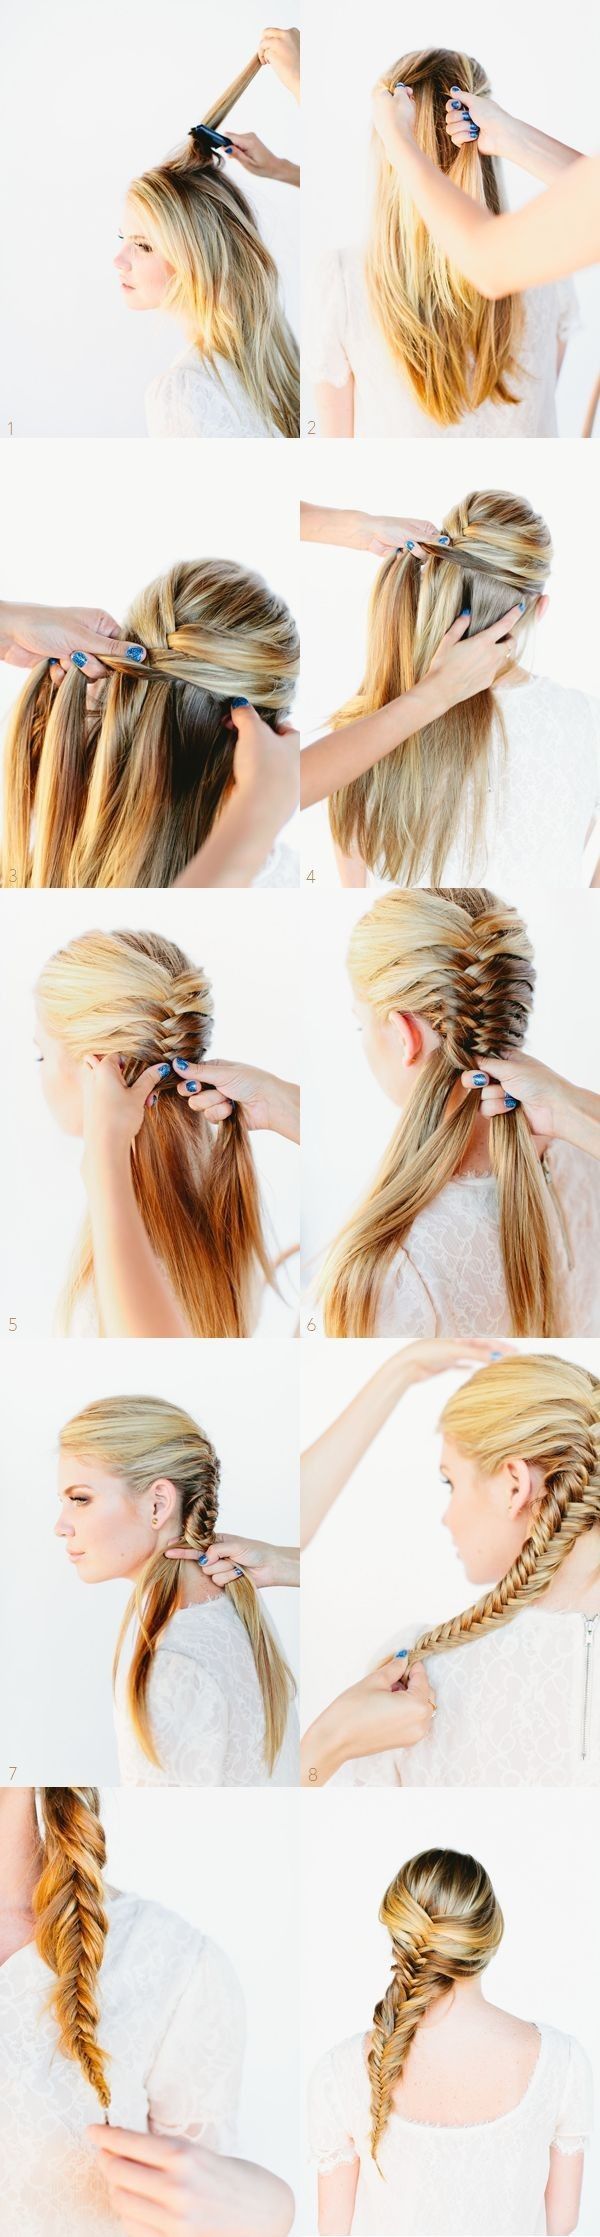 15 Cute hairstyles for 2014: Step-by-Step Hairstyles with Long Hair